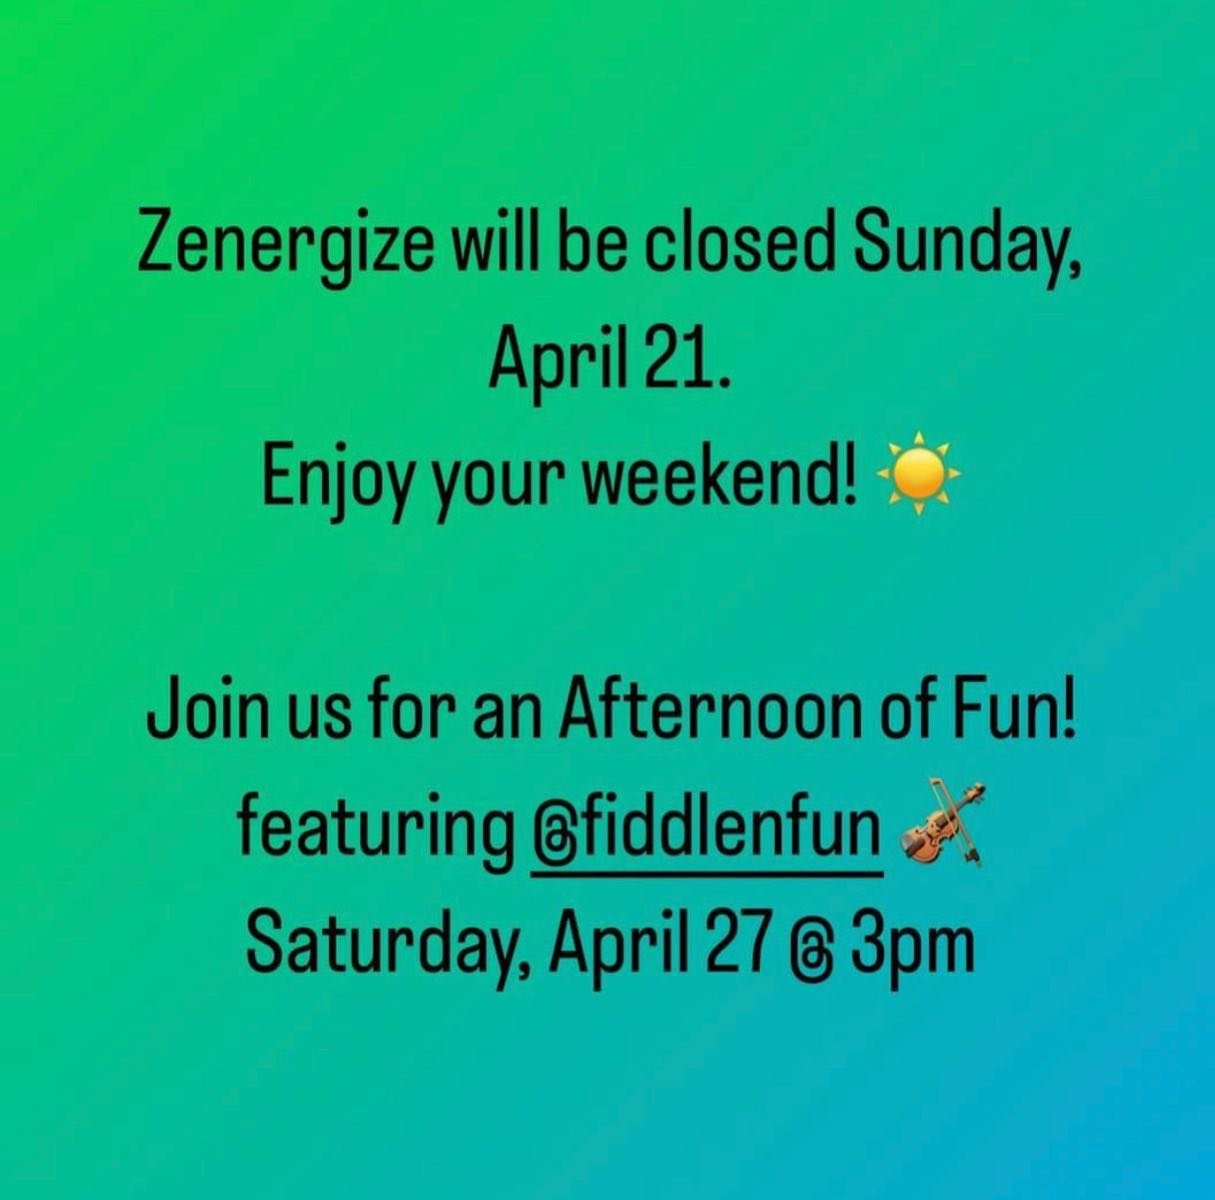 We&rsquo;ll be closed Sunday 4/21. Enjoy your weekend! Join us next Saturday 4/27 for an afternoon of fun!! 3-5pm